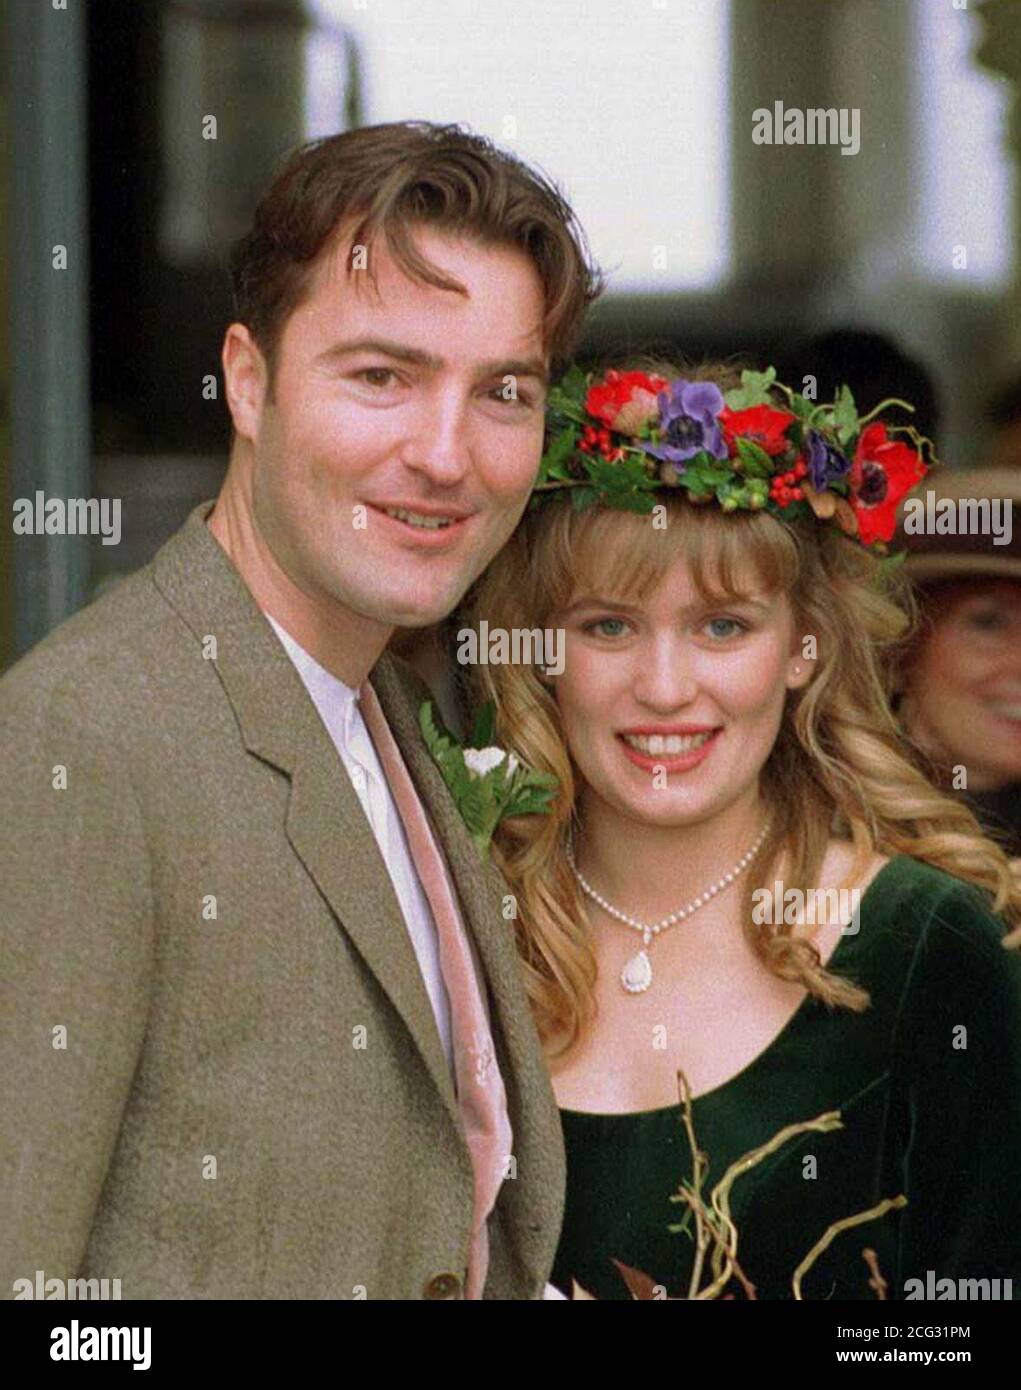 Is Nick Berry's Wife An Actress